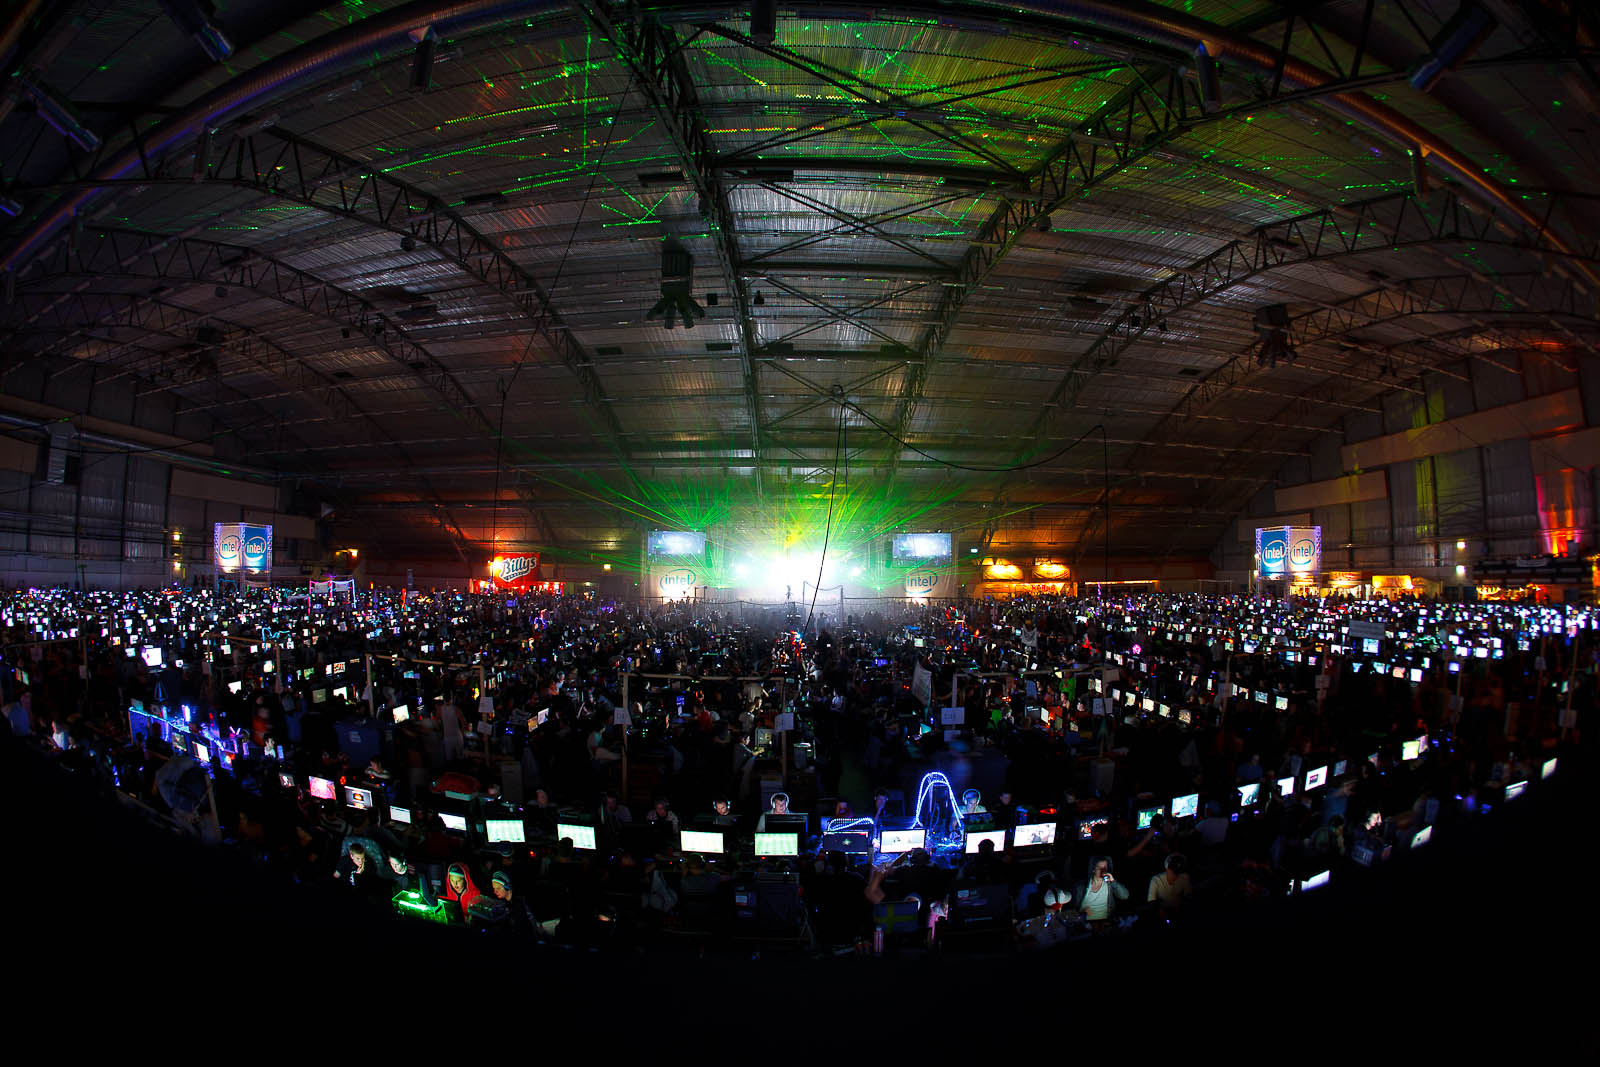 Hall D on the second night, 12,280 computers